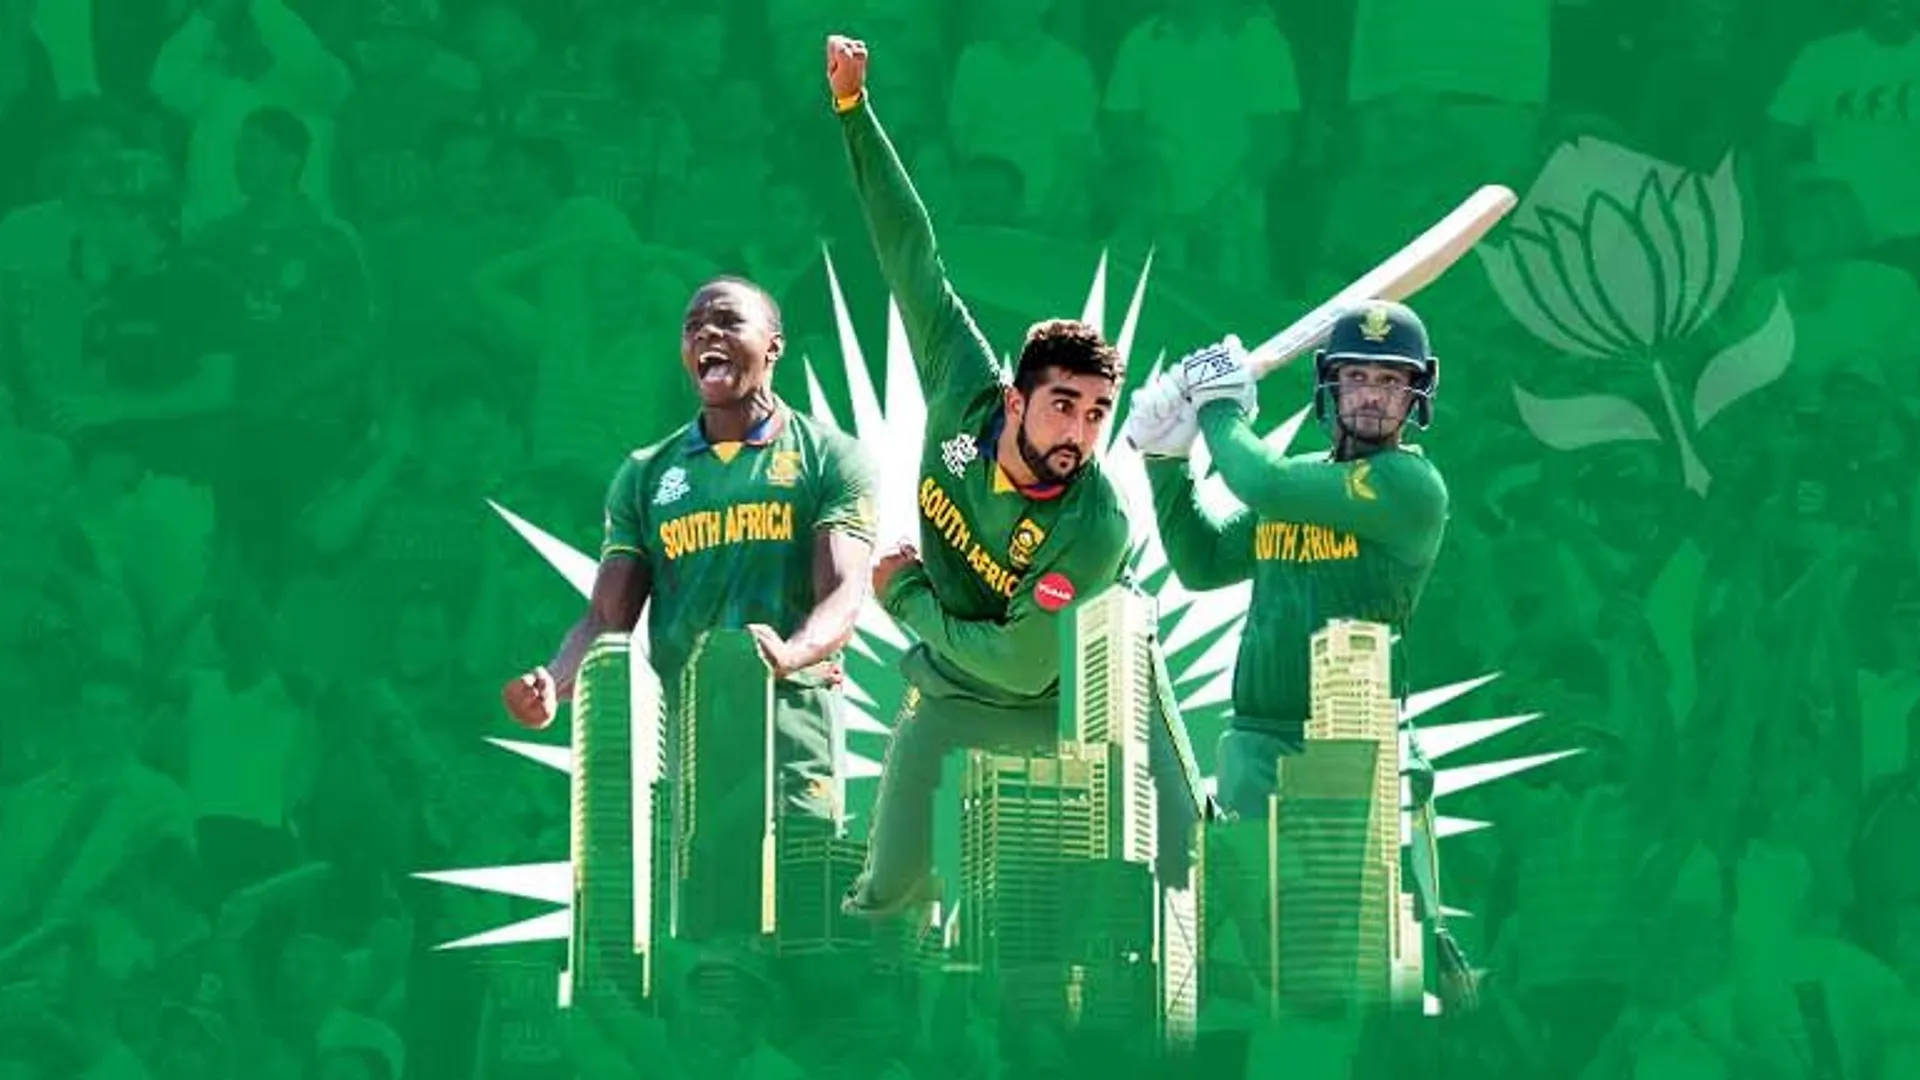 Download South Africa Cricket Green Poster Wallpaper